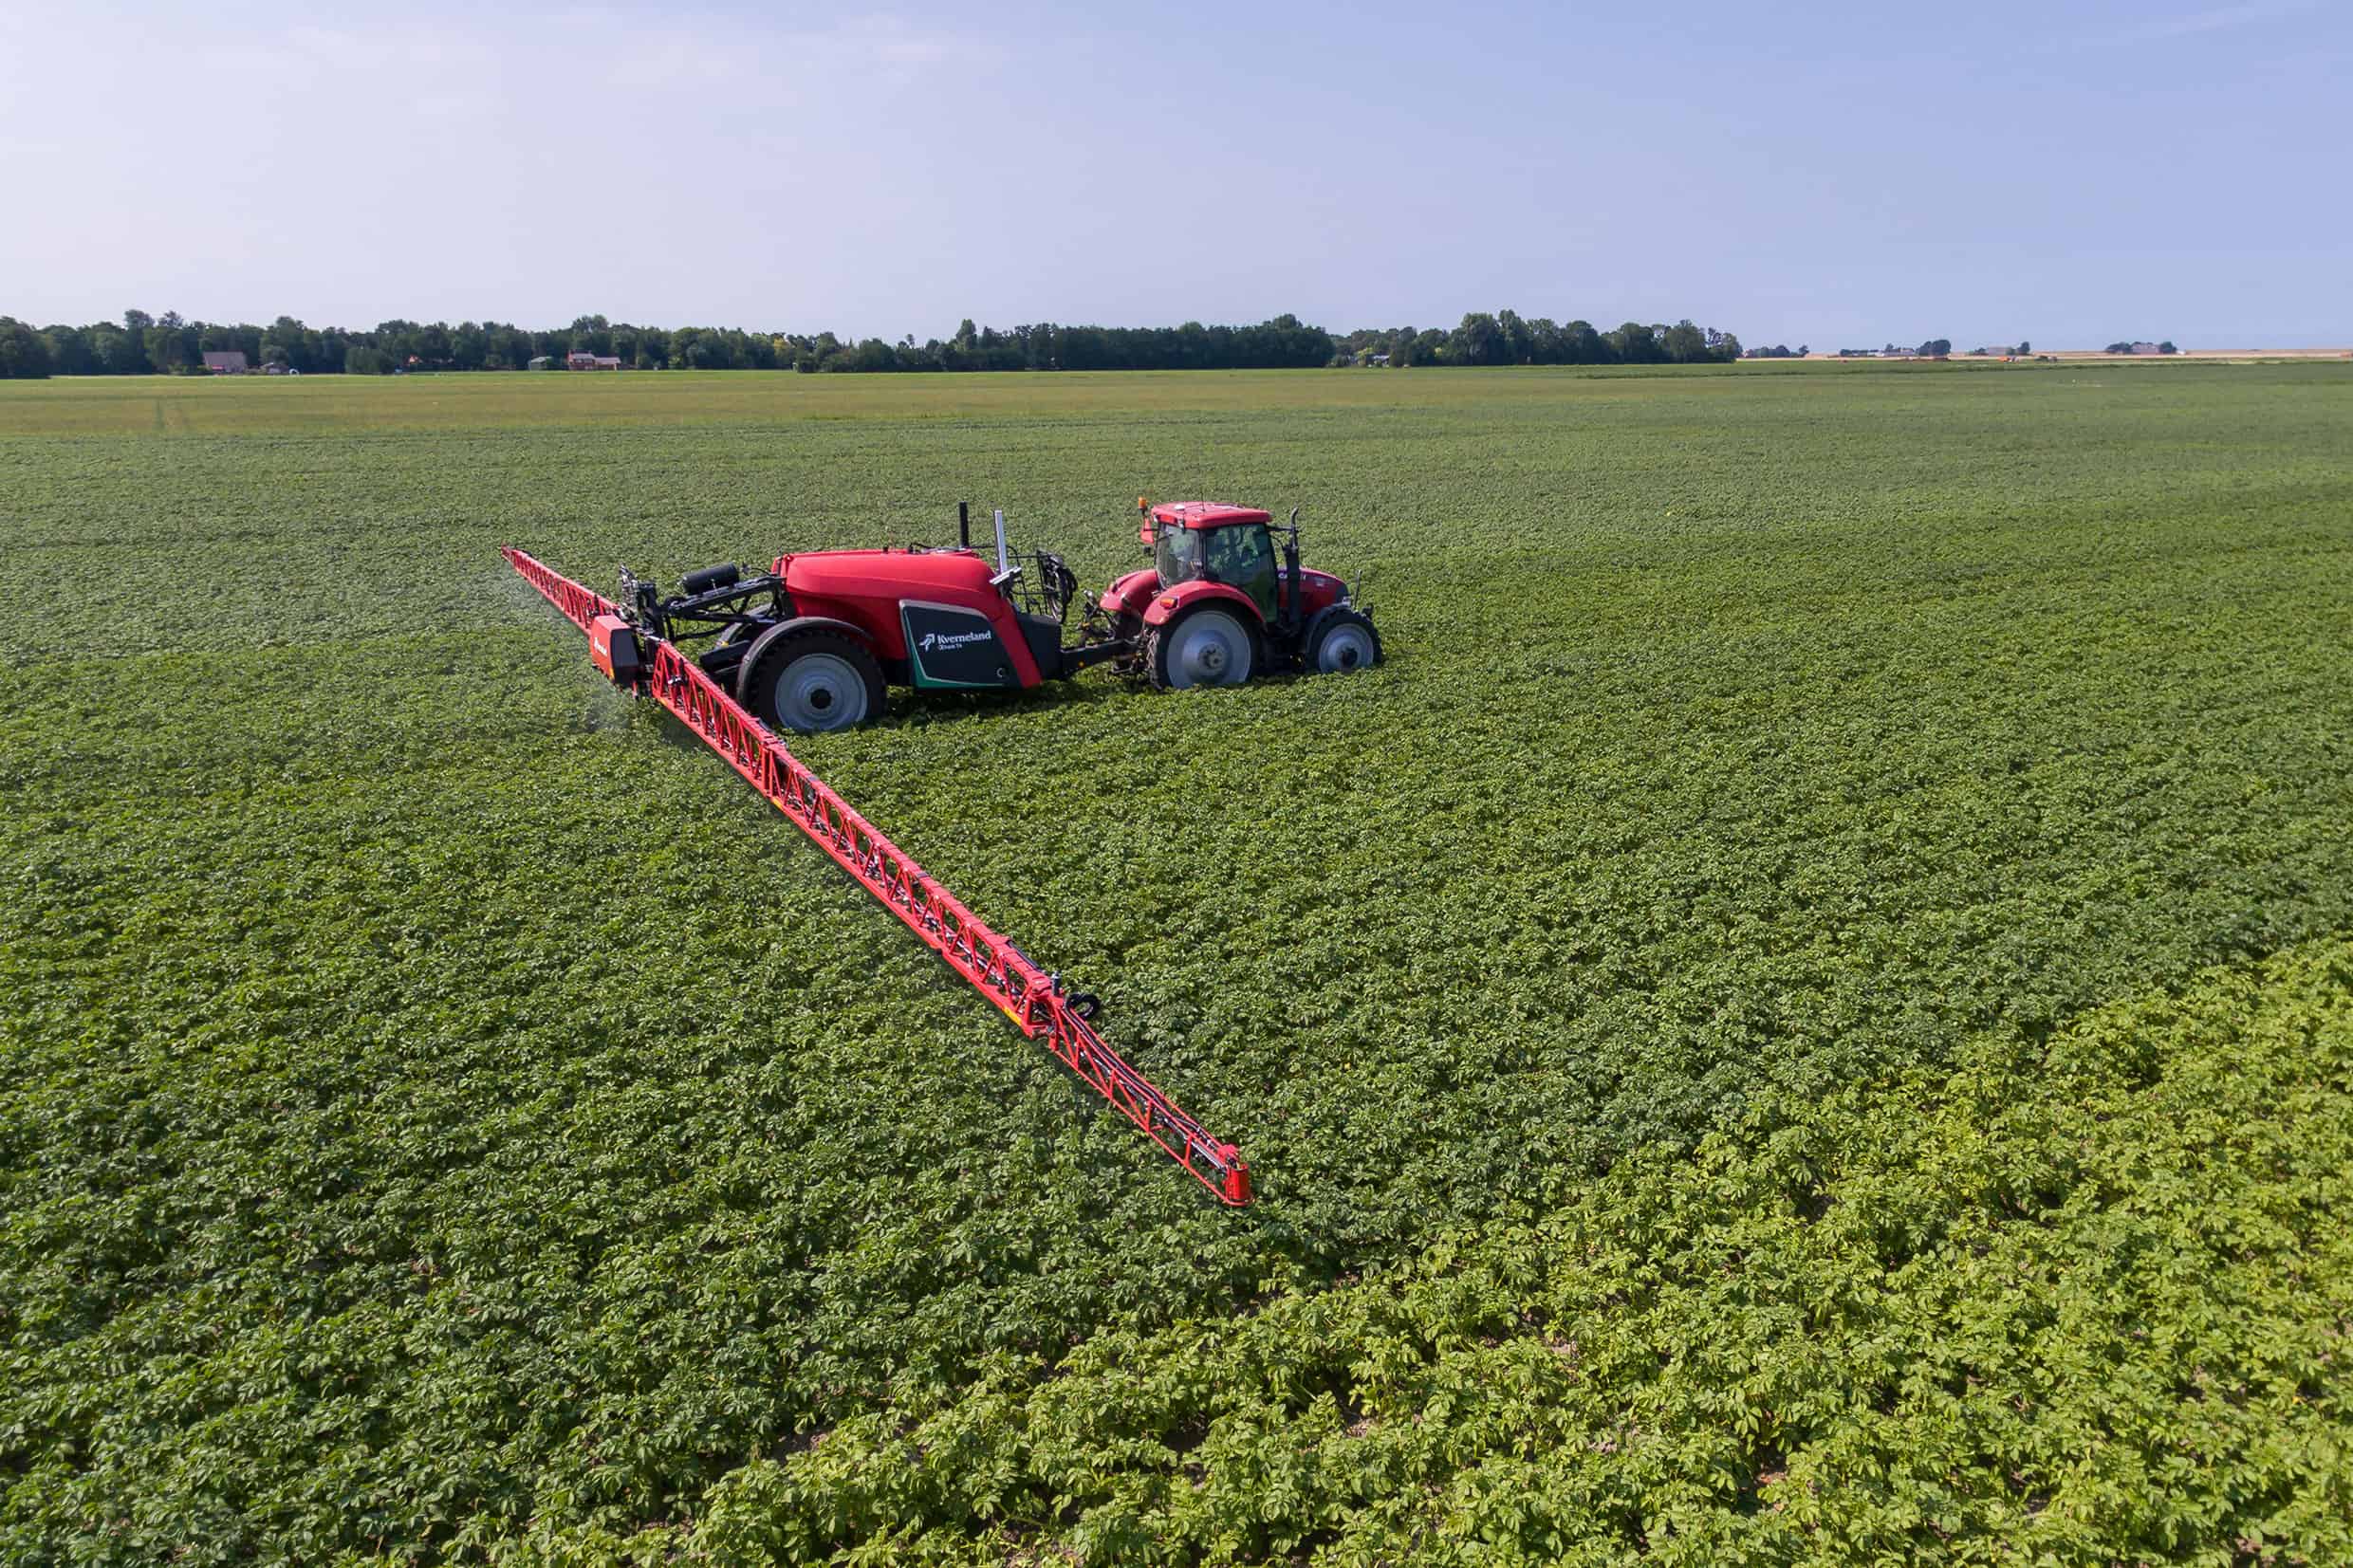 Advanced crop protection from Kverneland